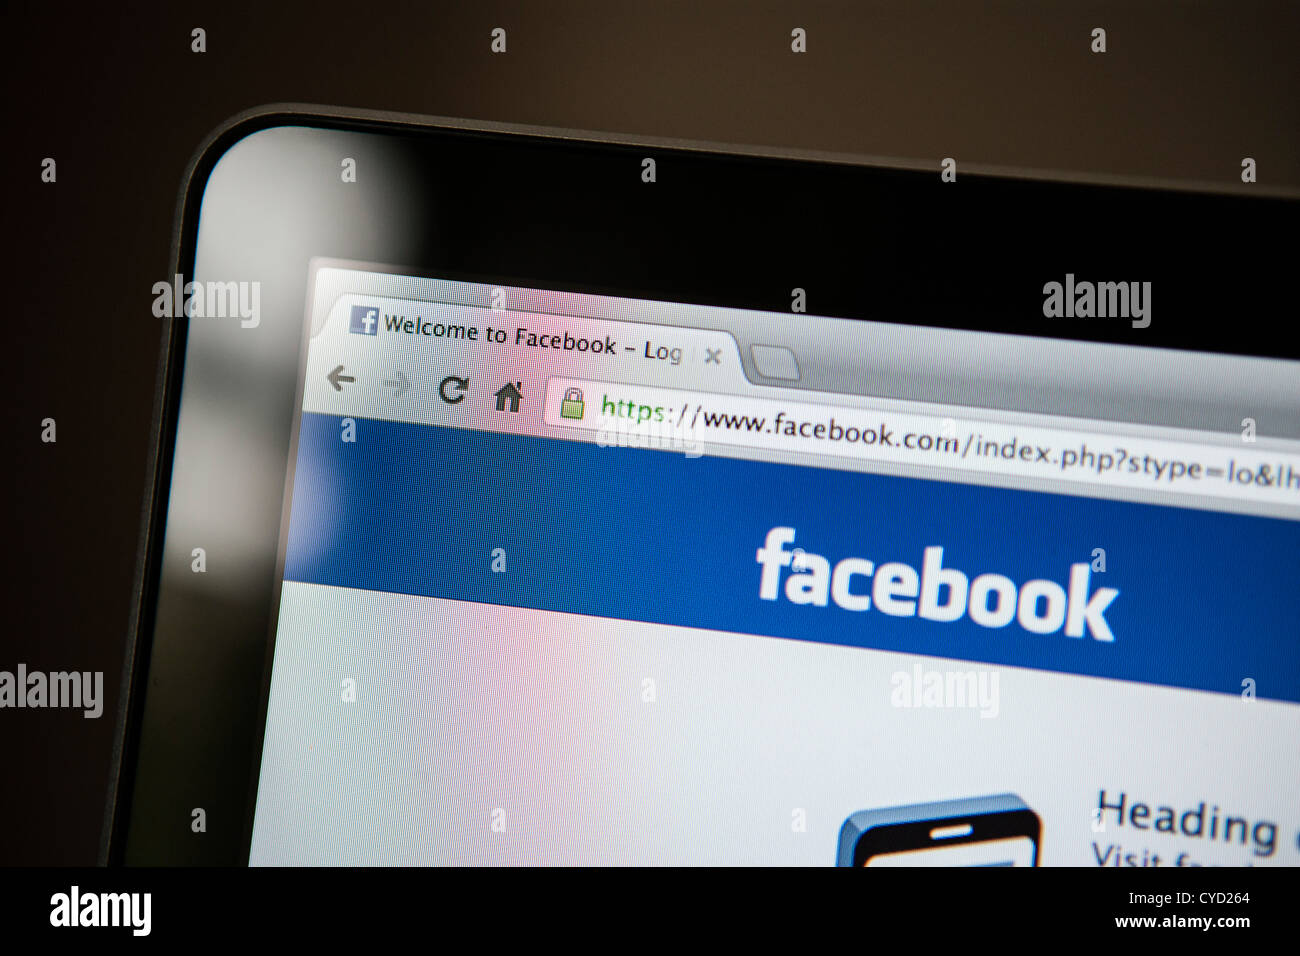 The login page of Facebook shown on a laptop screen. Stock Photo